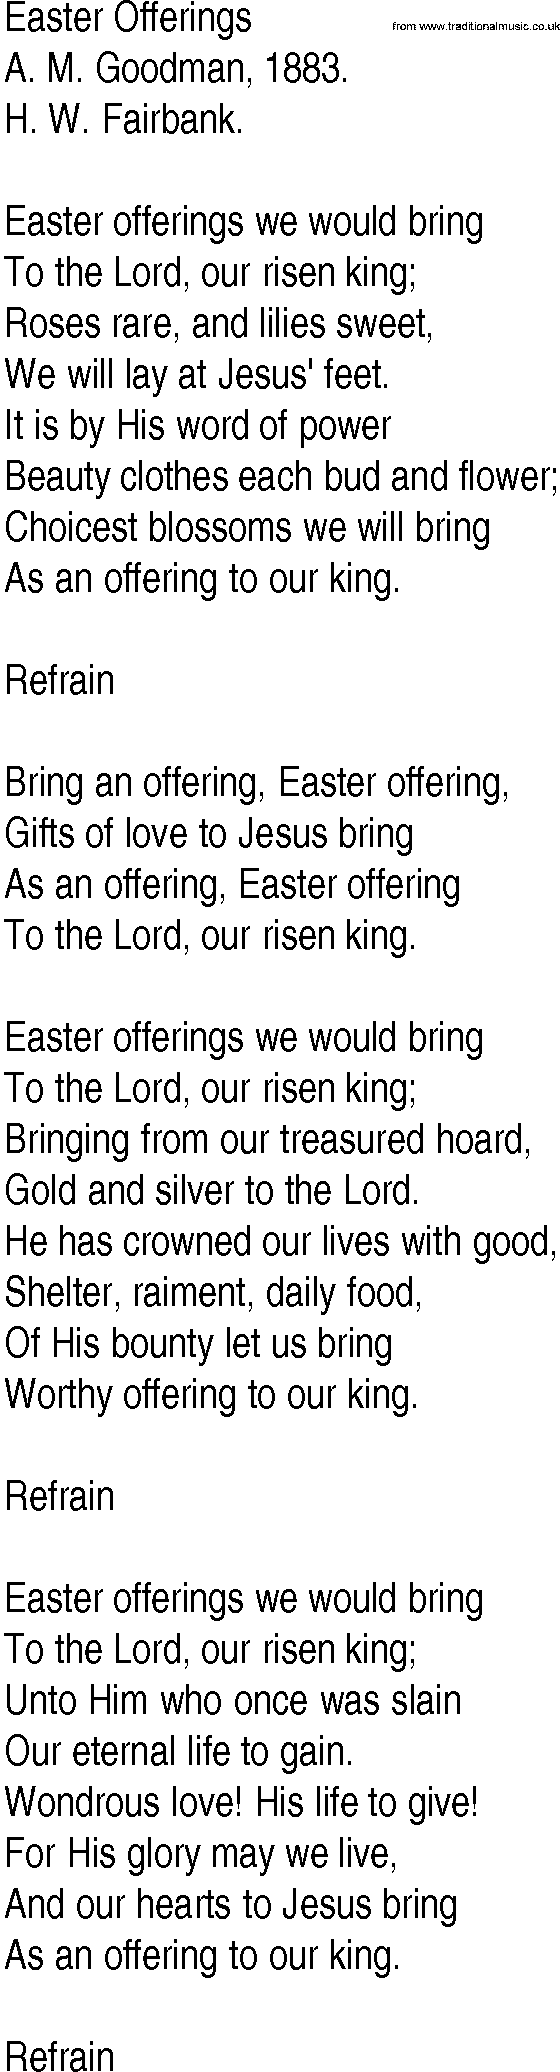 Hymn and Gospel Song: Easter Offerings by A M Goodman lyrics